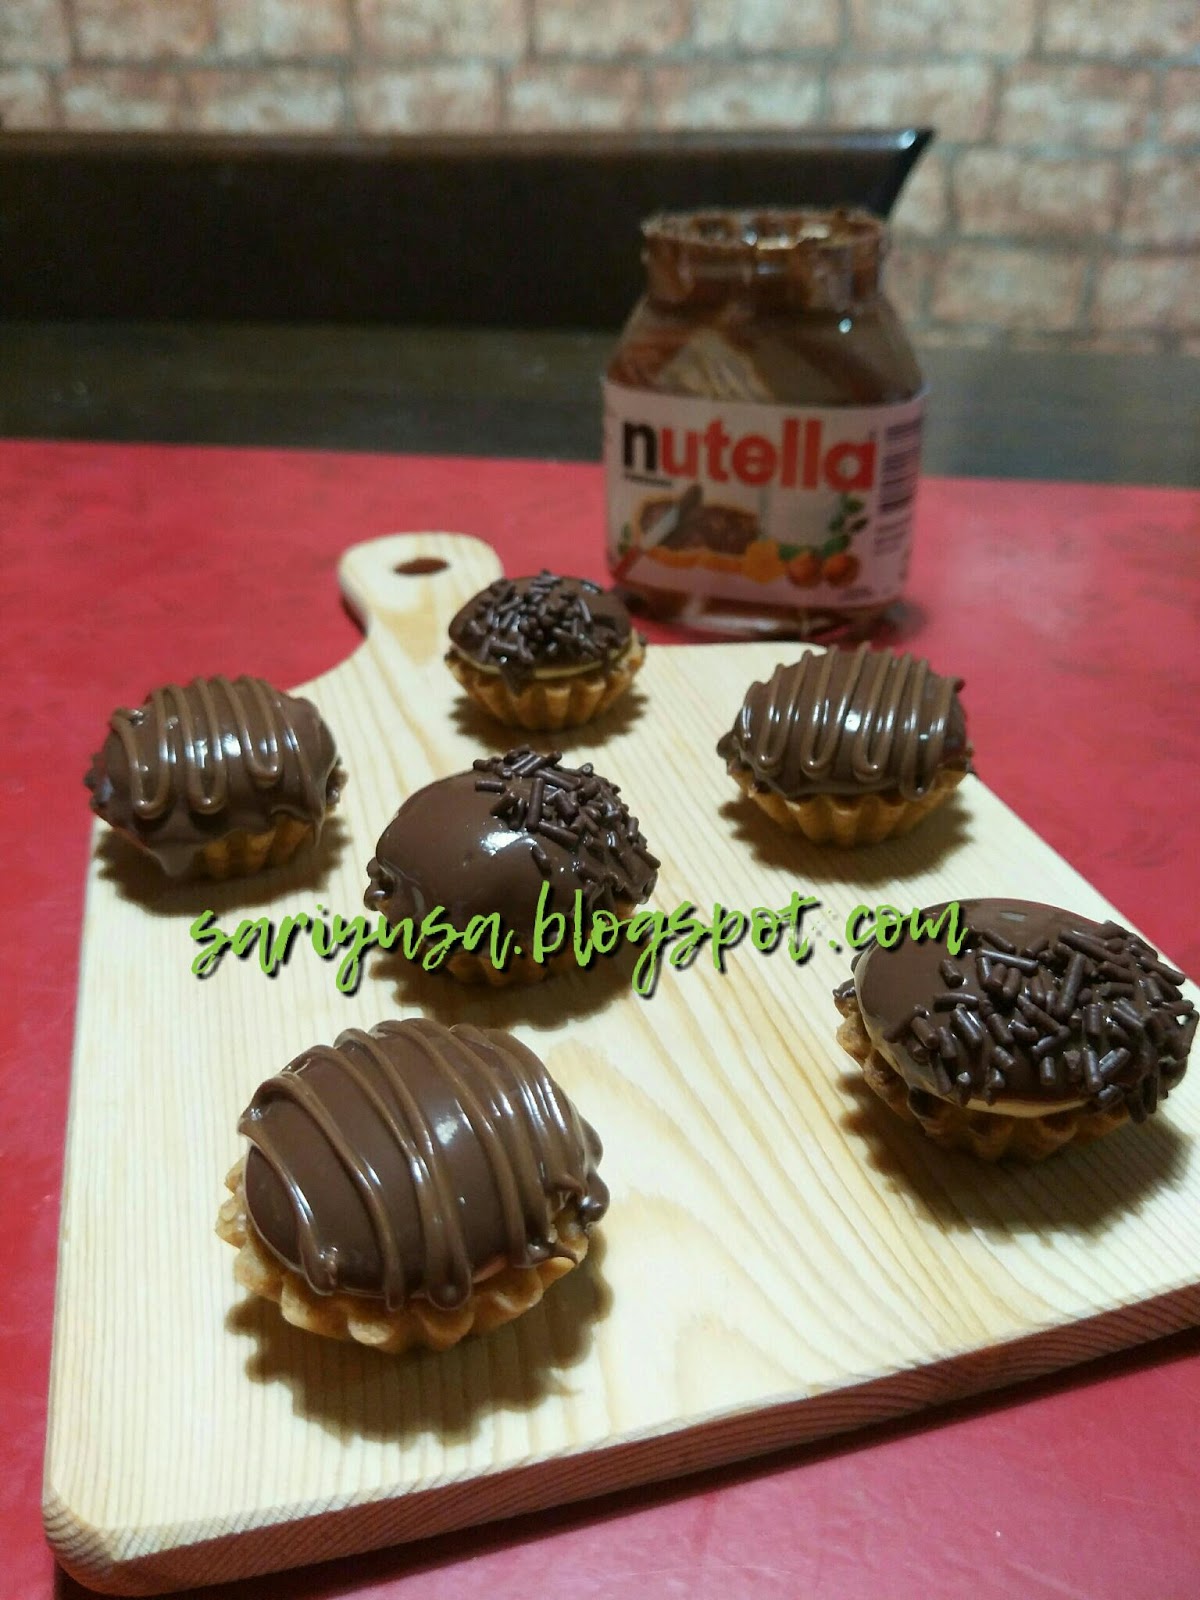 MAGNUM CHEESE TART WITH NUTELLA FILLING